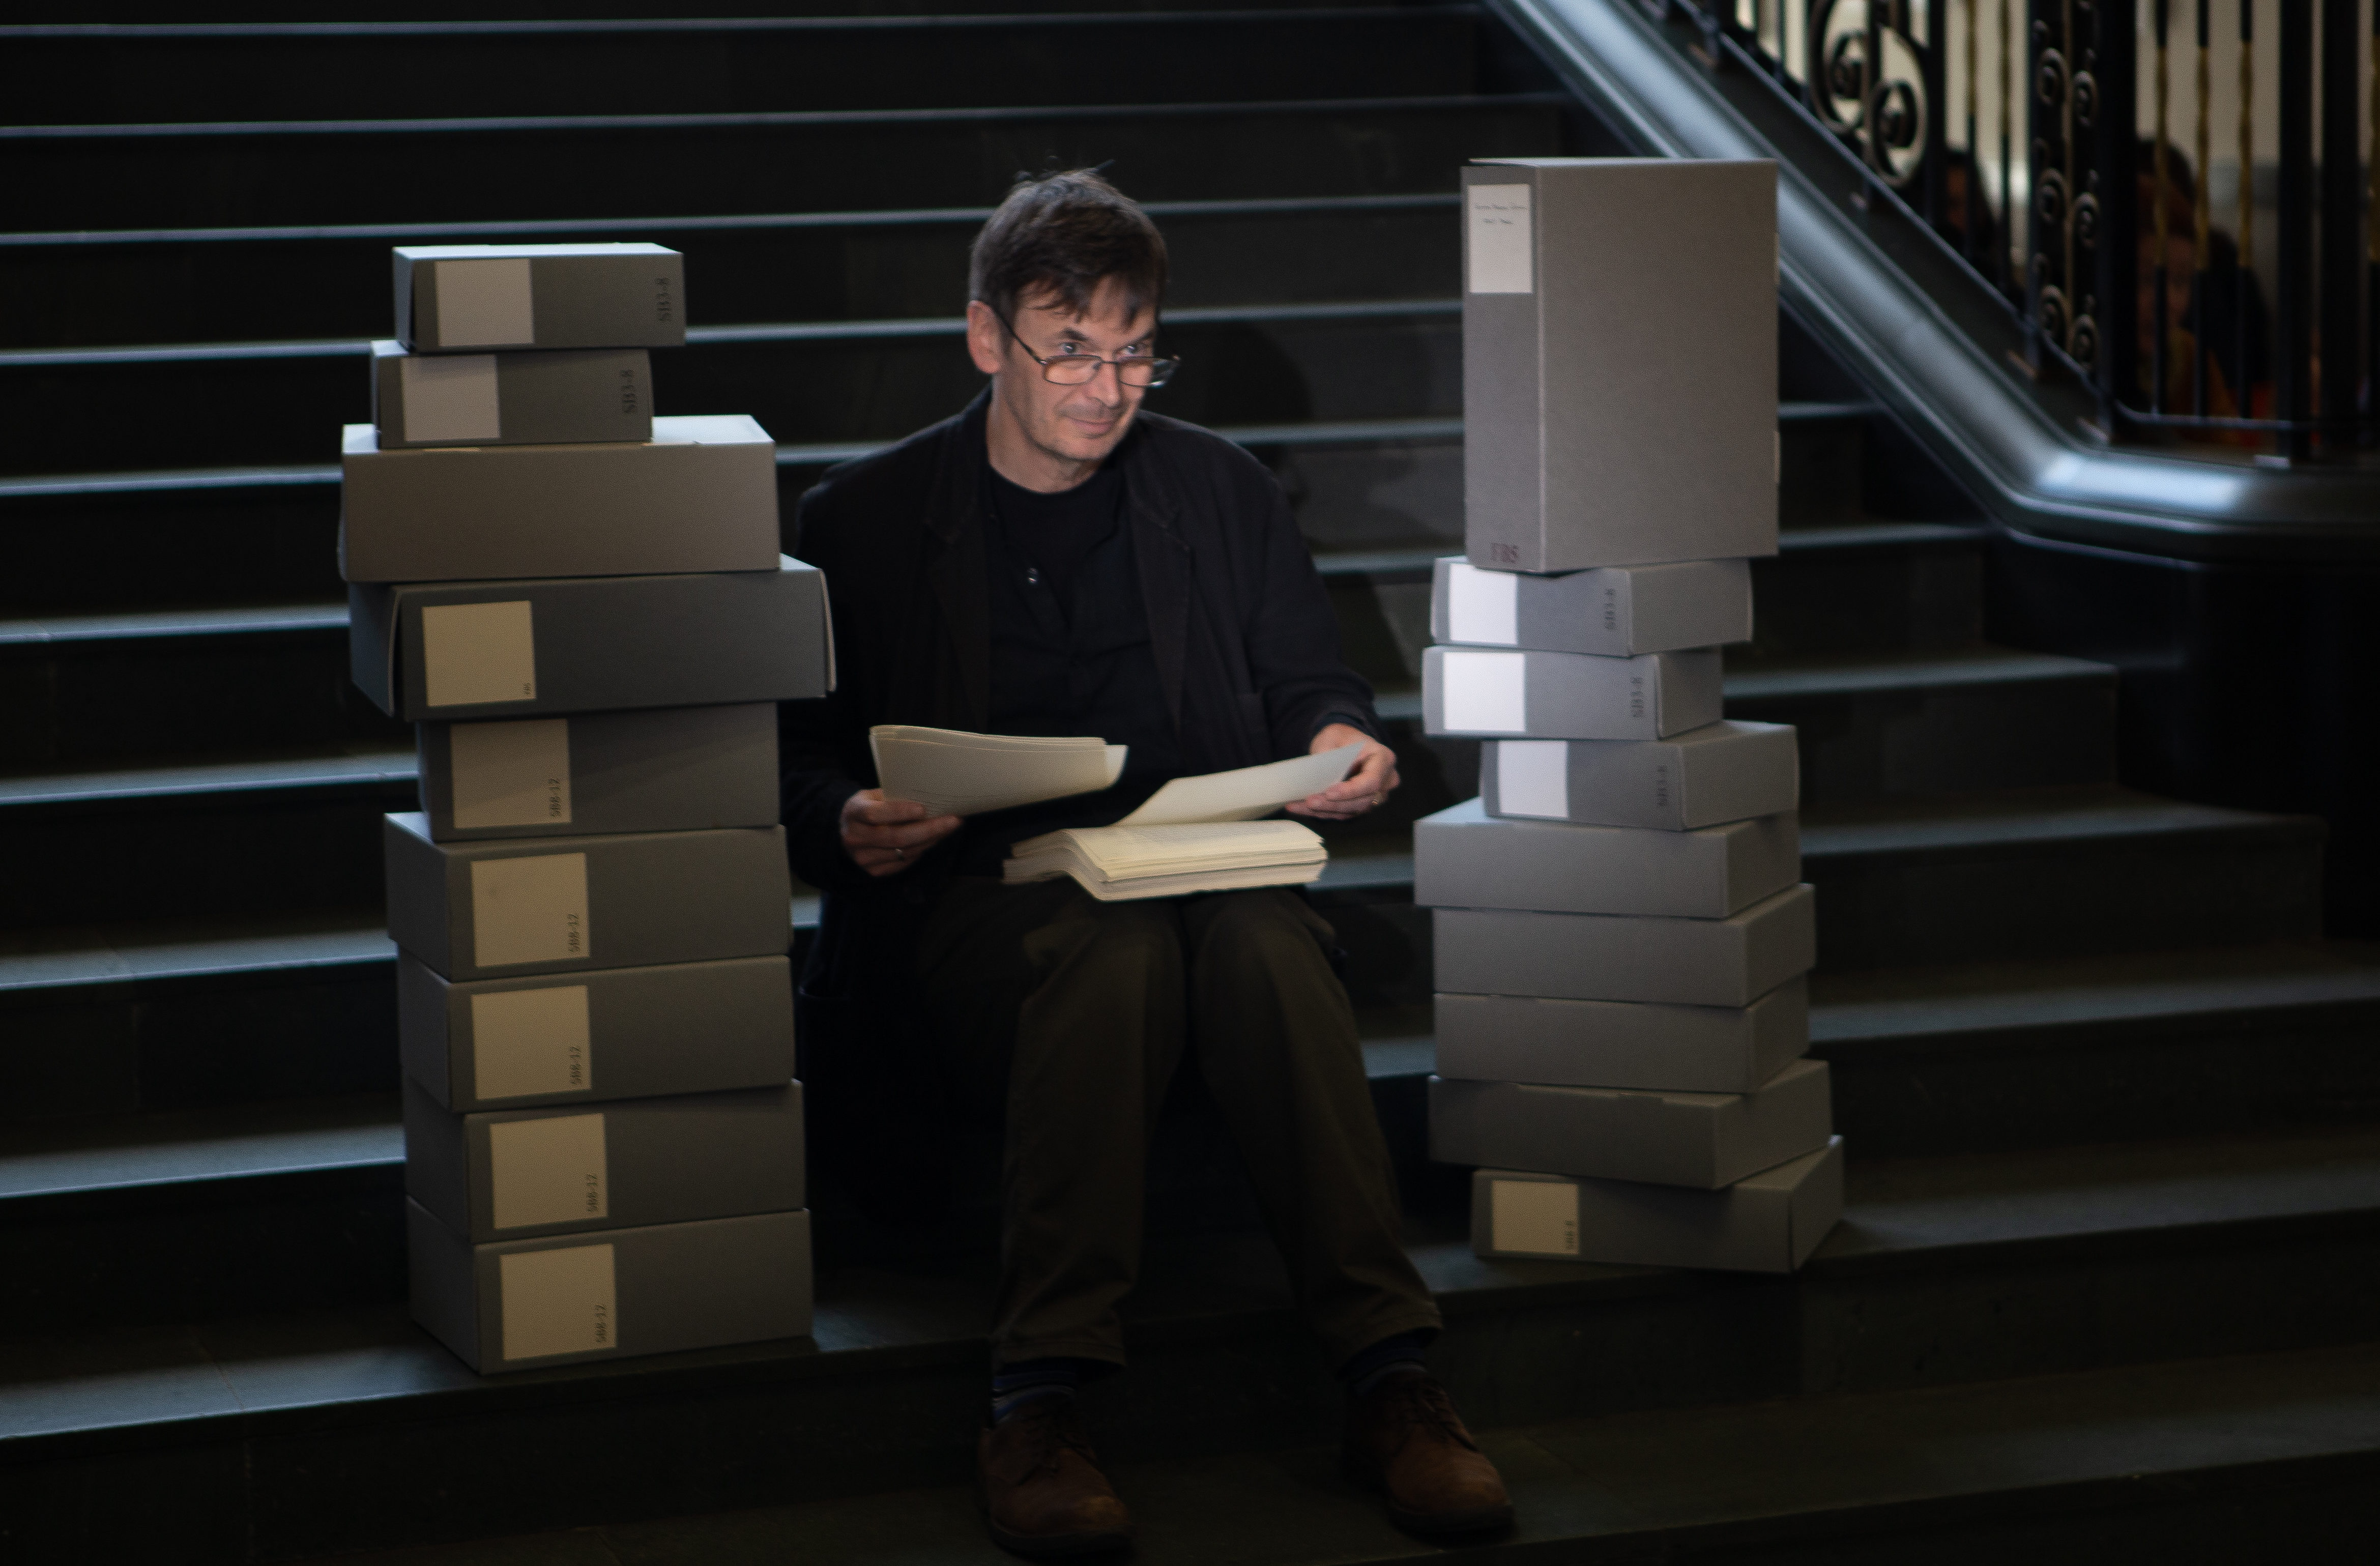 Author Ian Rankin today at National Library of Scotland after gifting his archive.